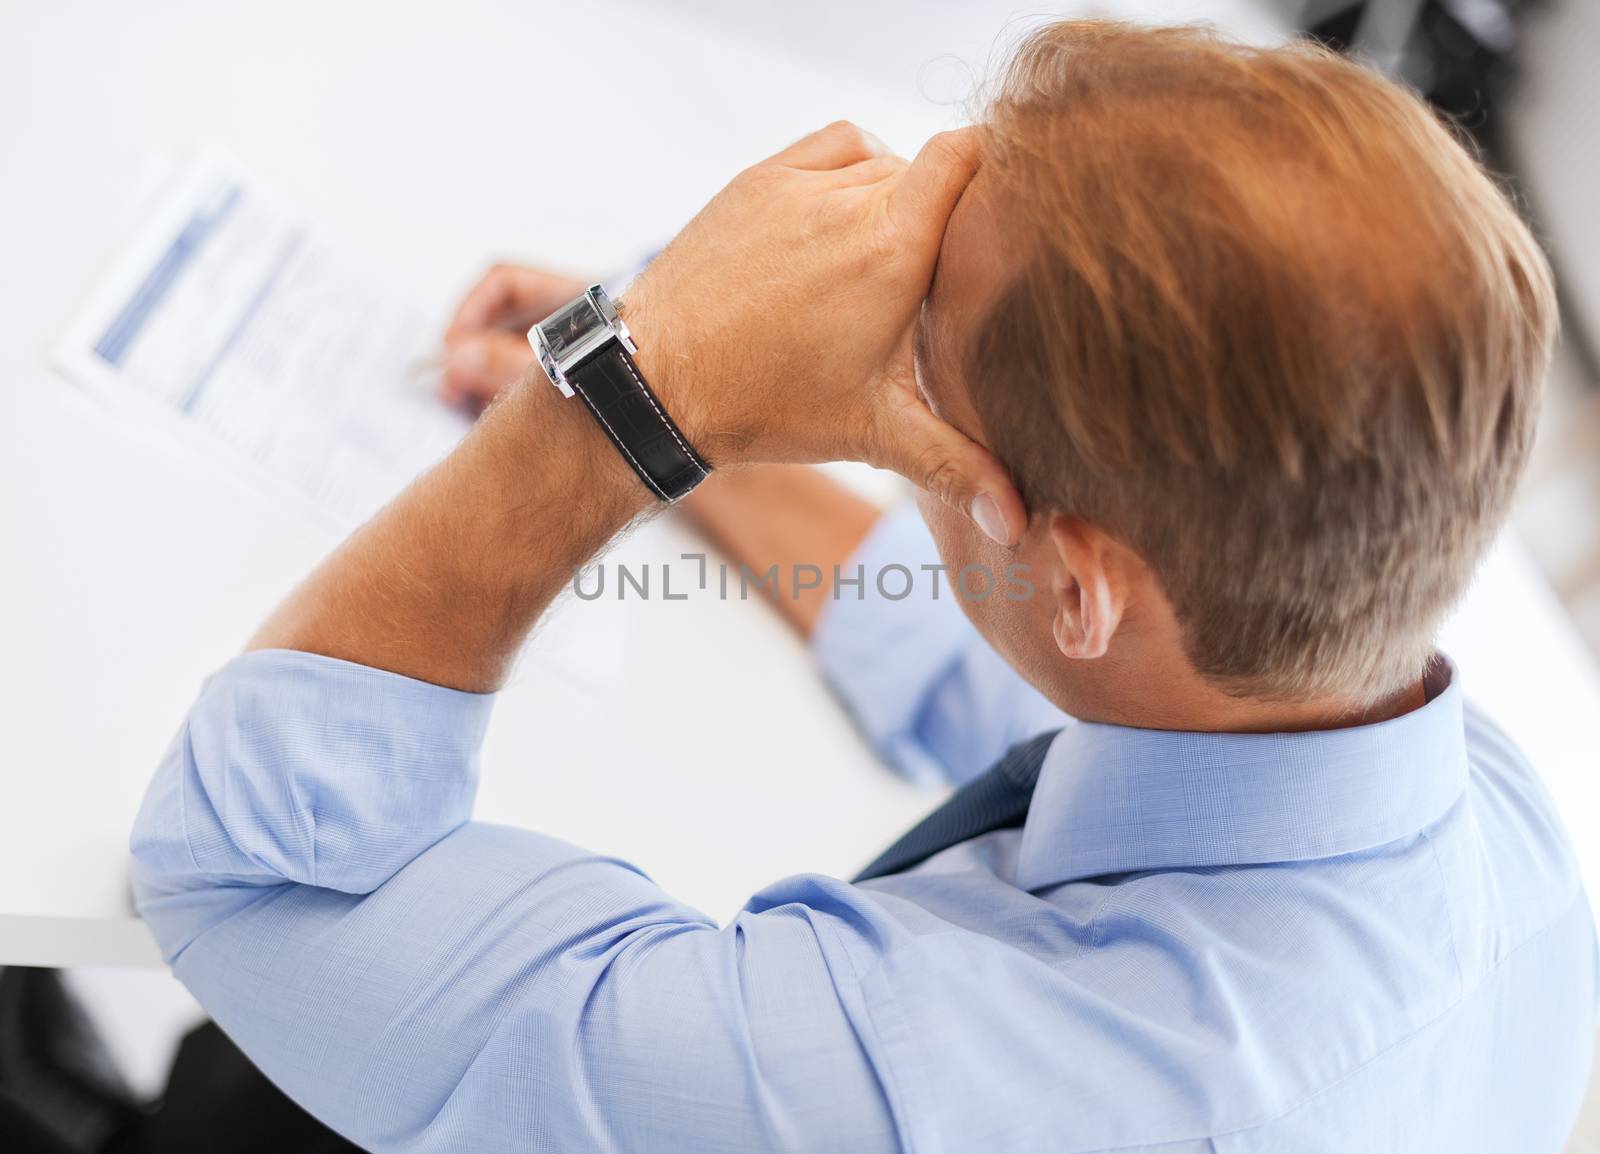 business, office, school and education concept - man signing a contract